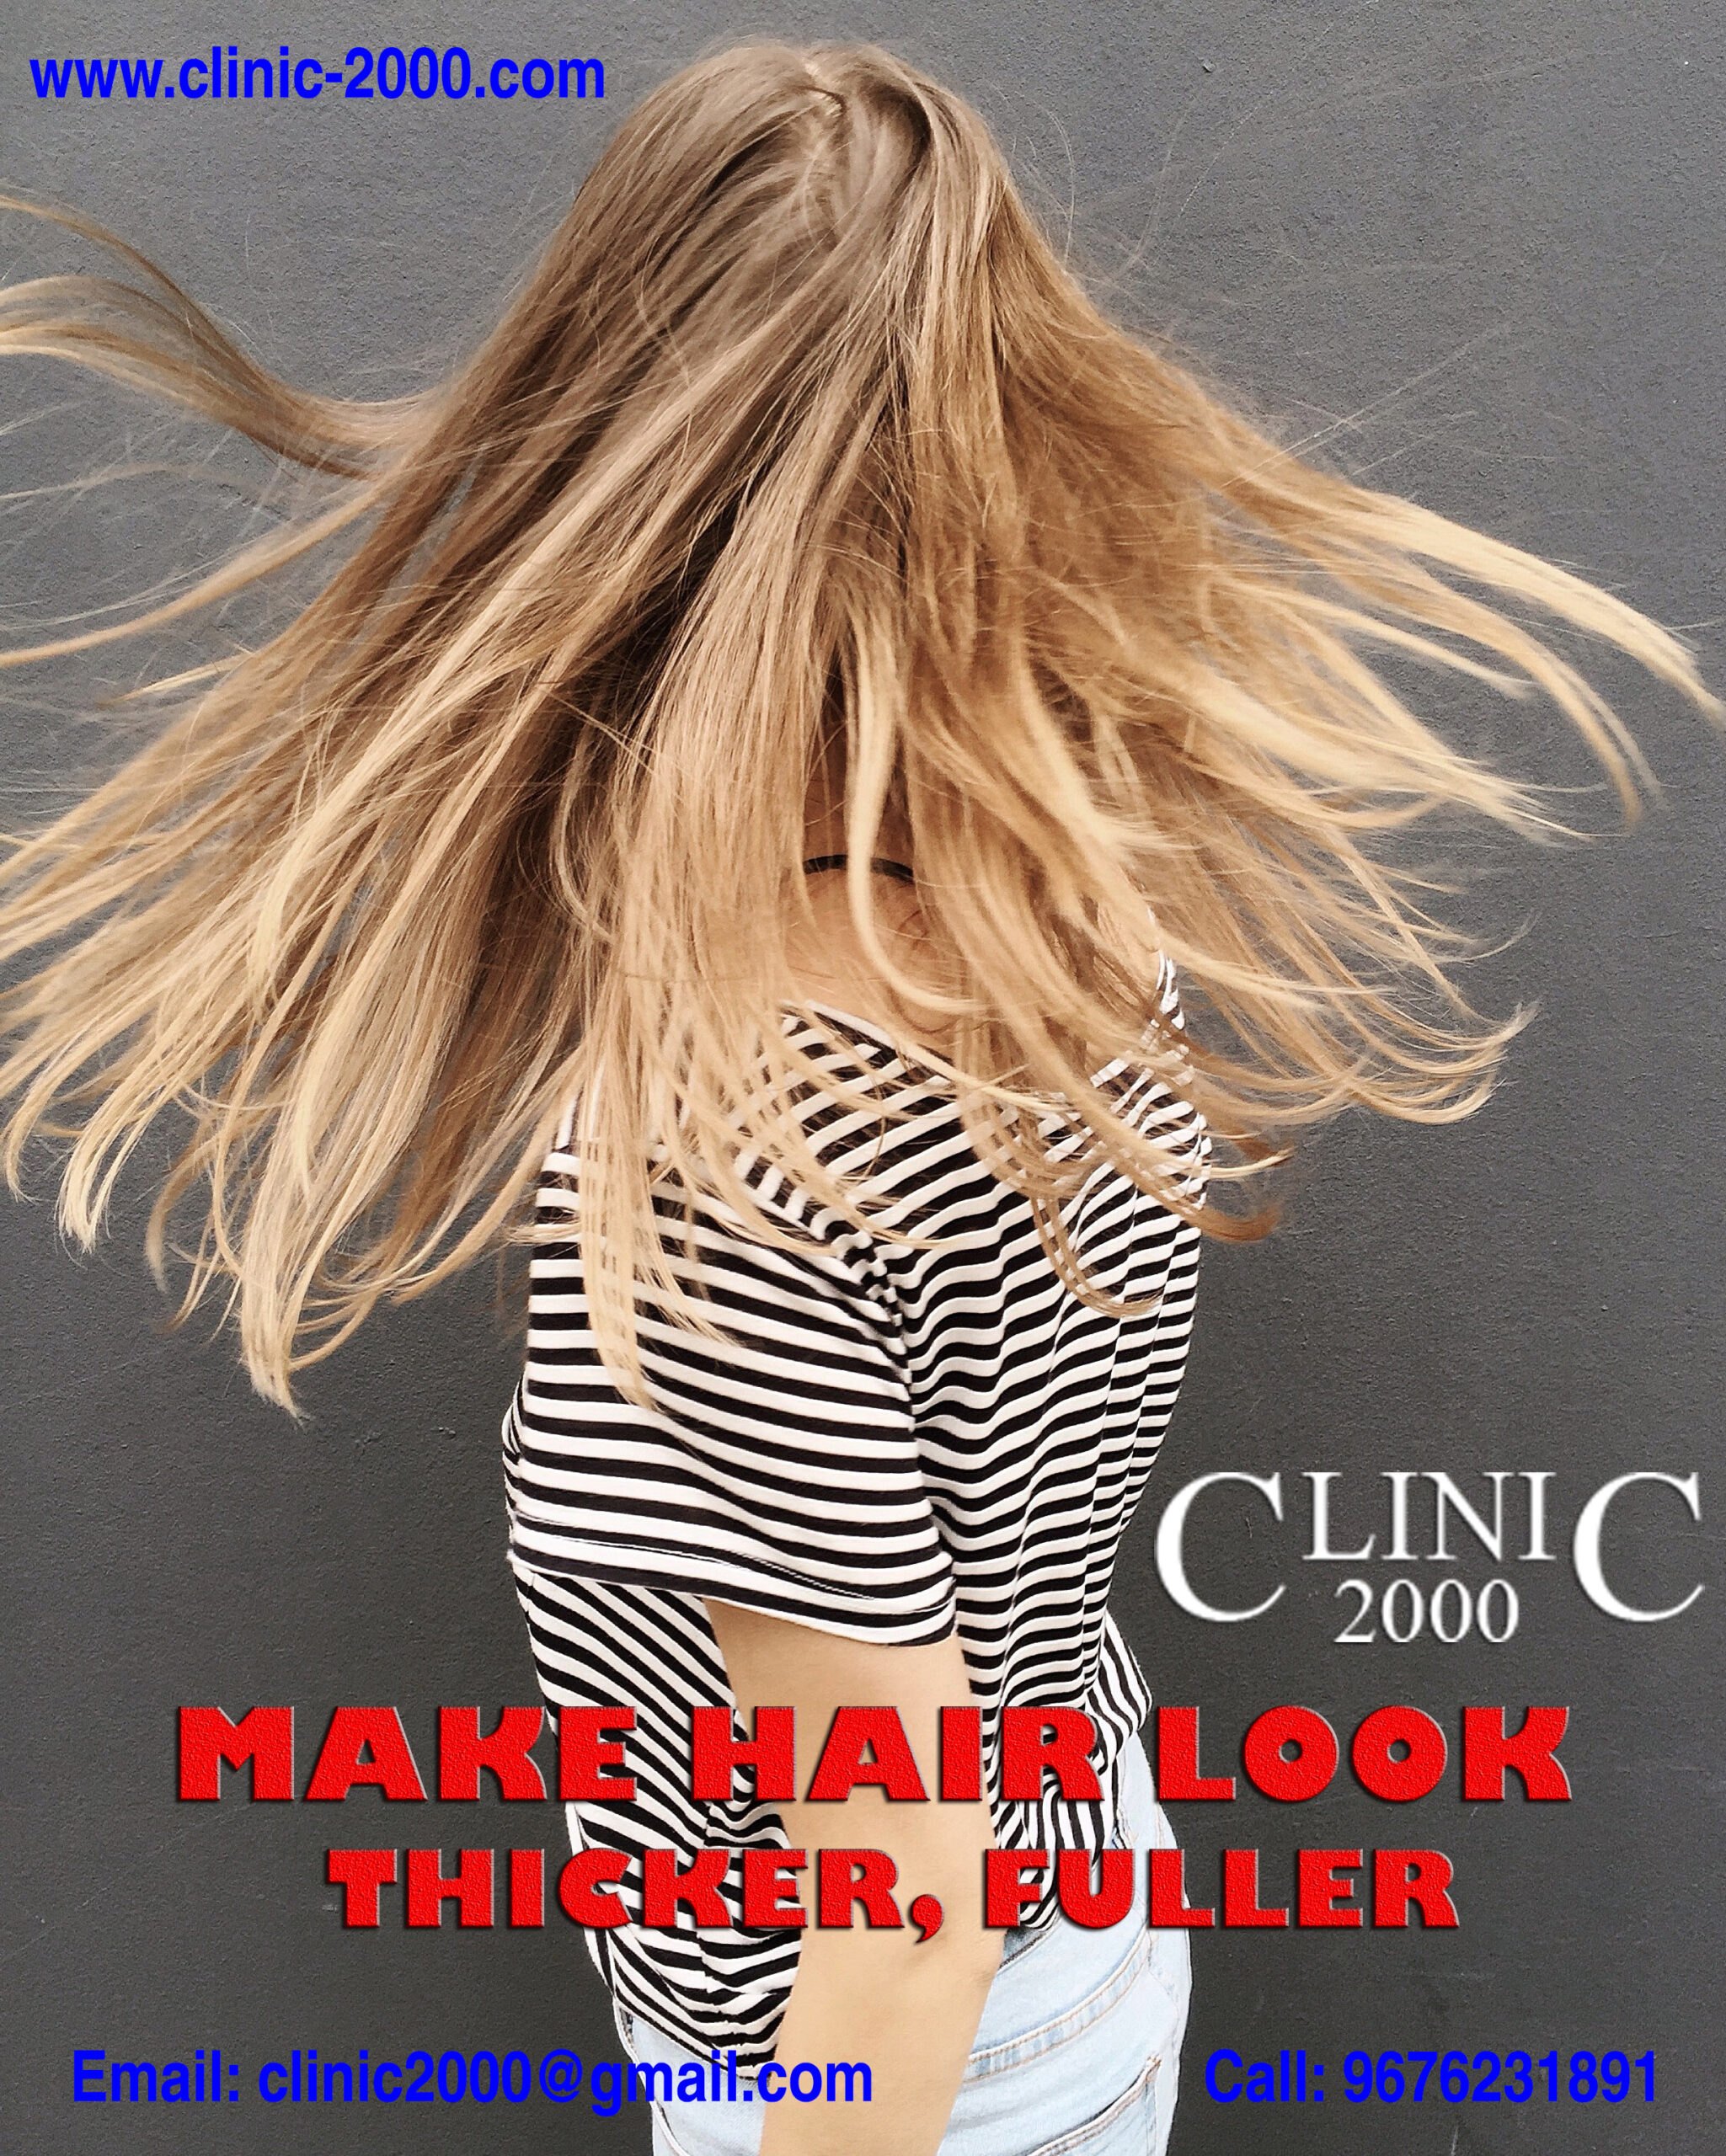 Make your Hair Thicker,Fuller at Clinic 2000